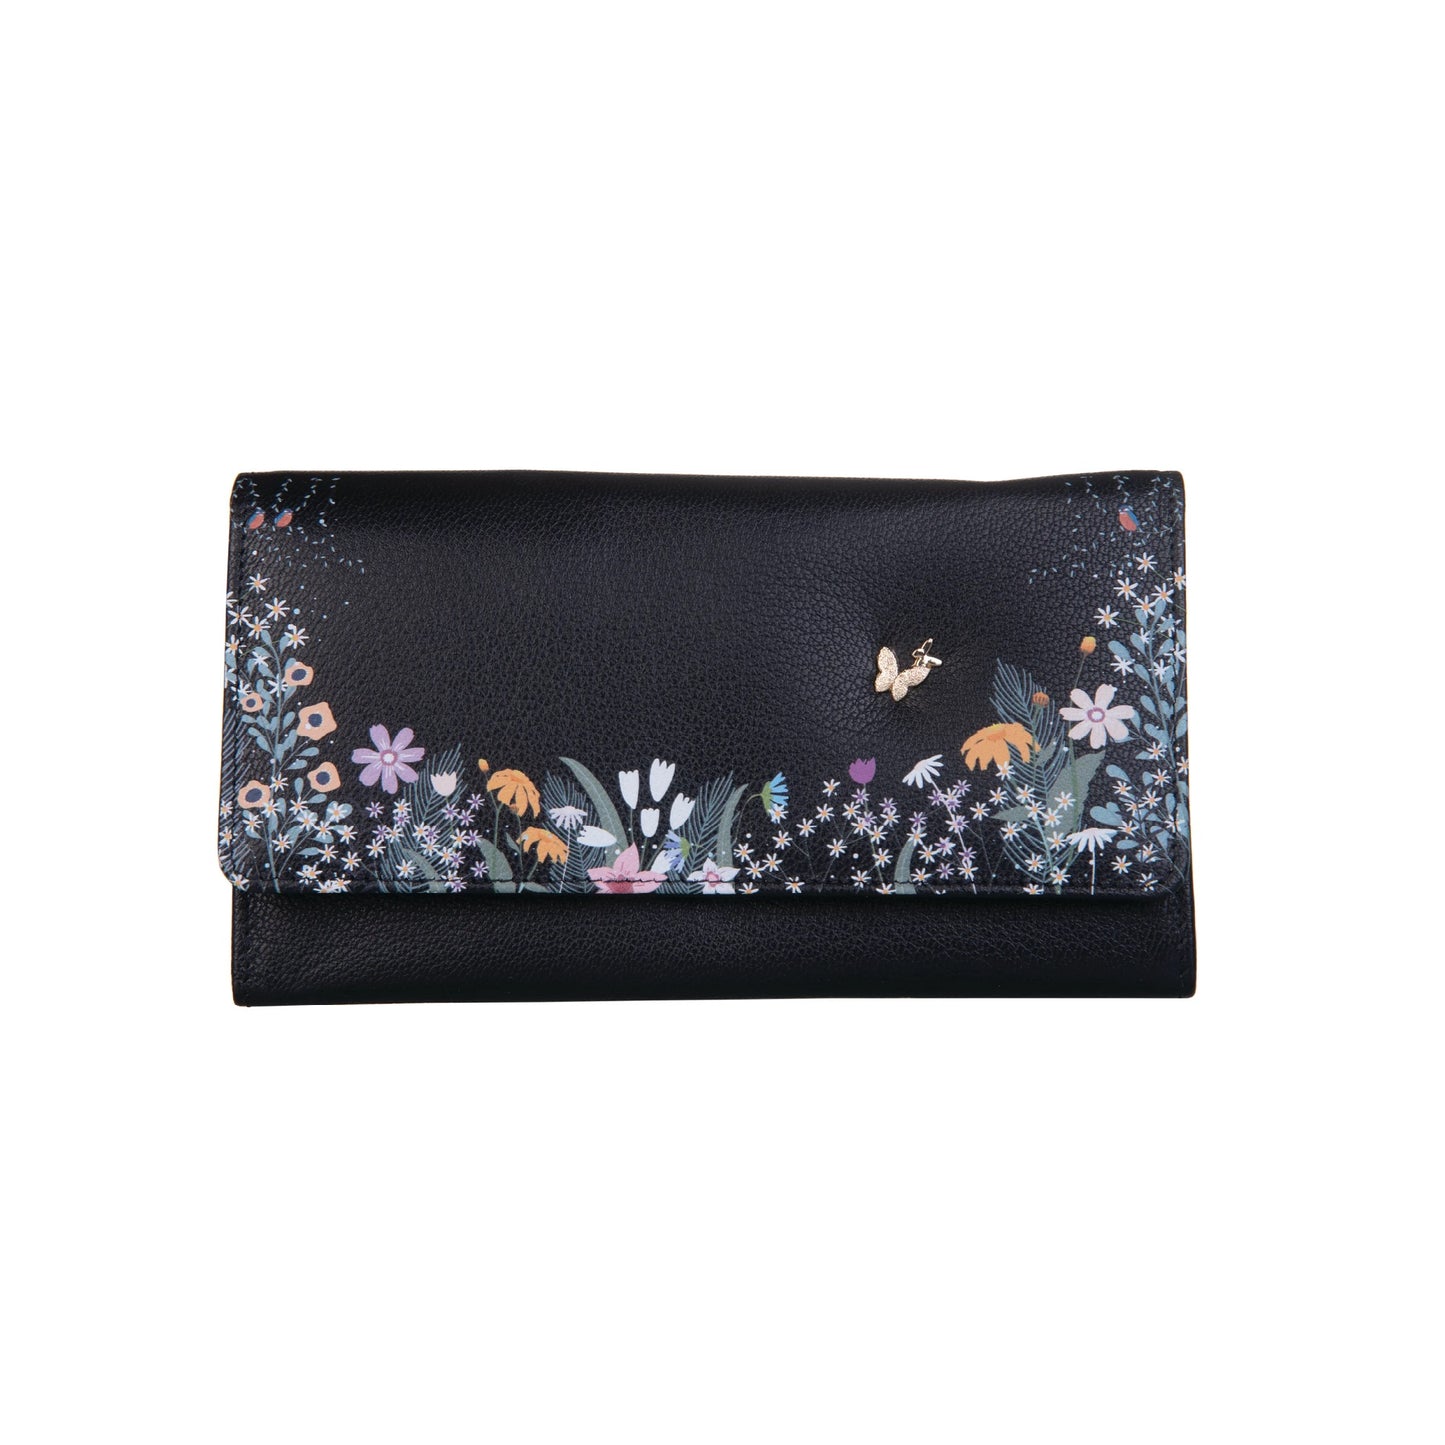 Shiloh Matinee Wallet Leather - Black